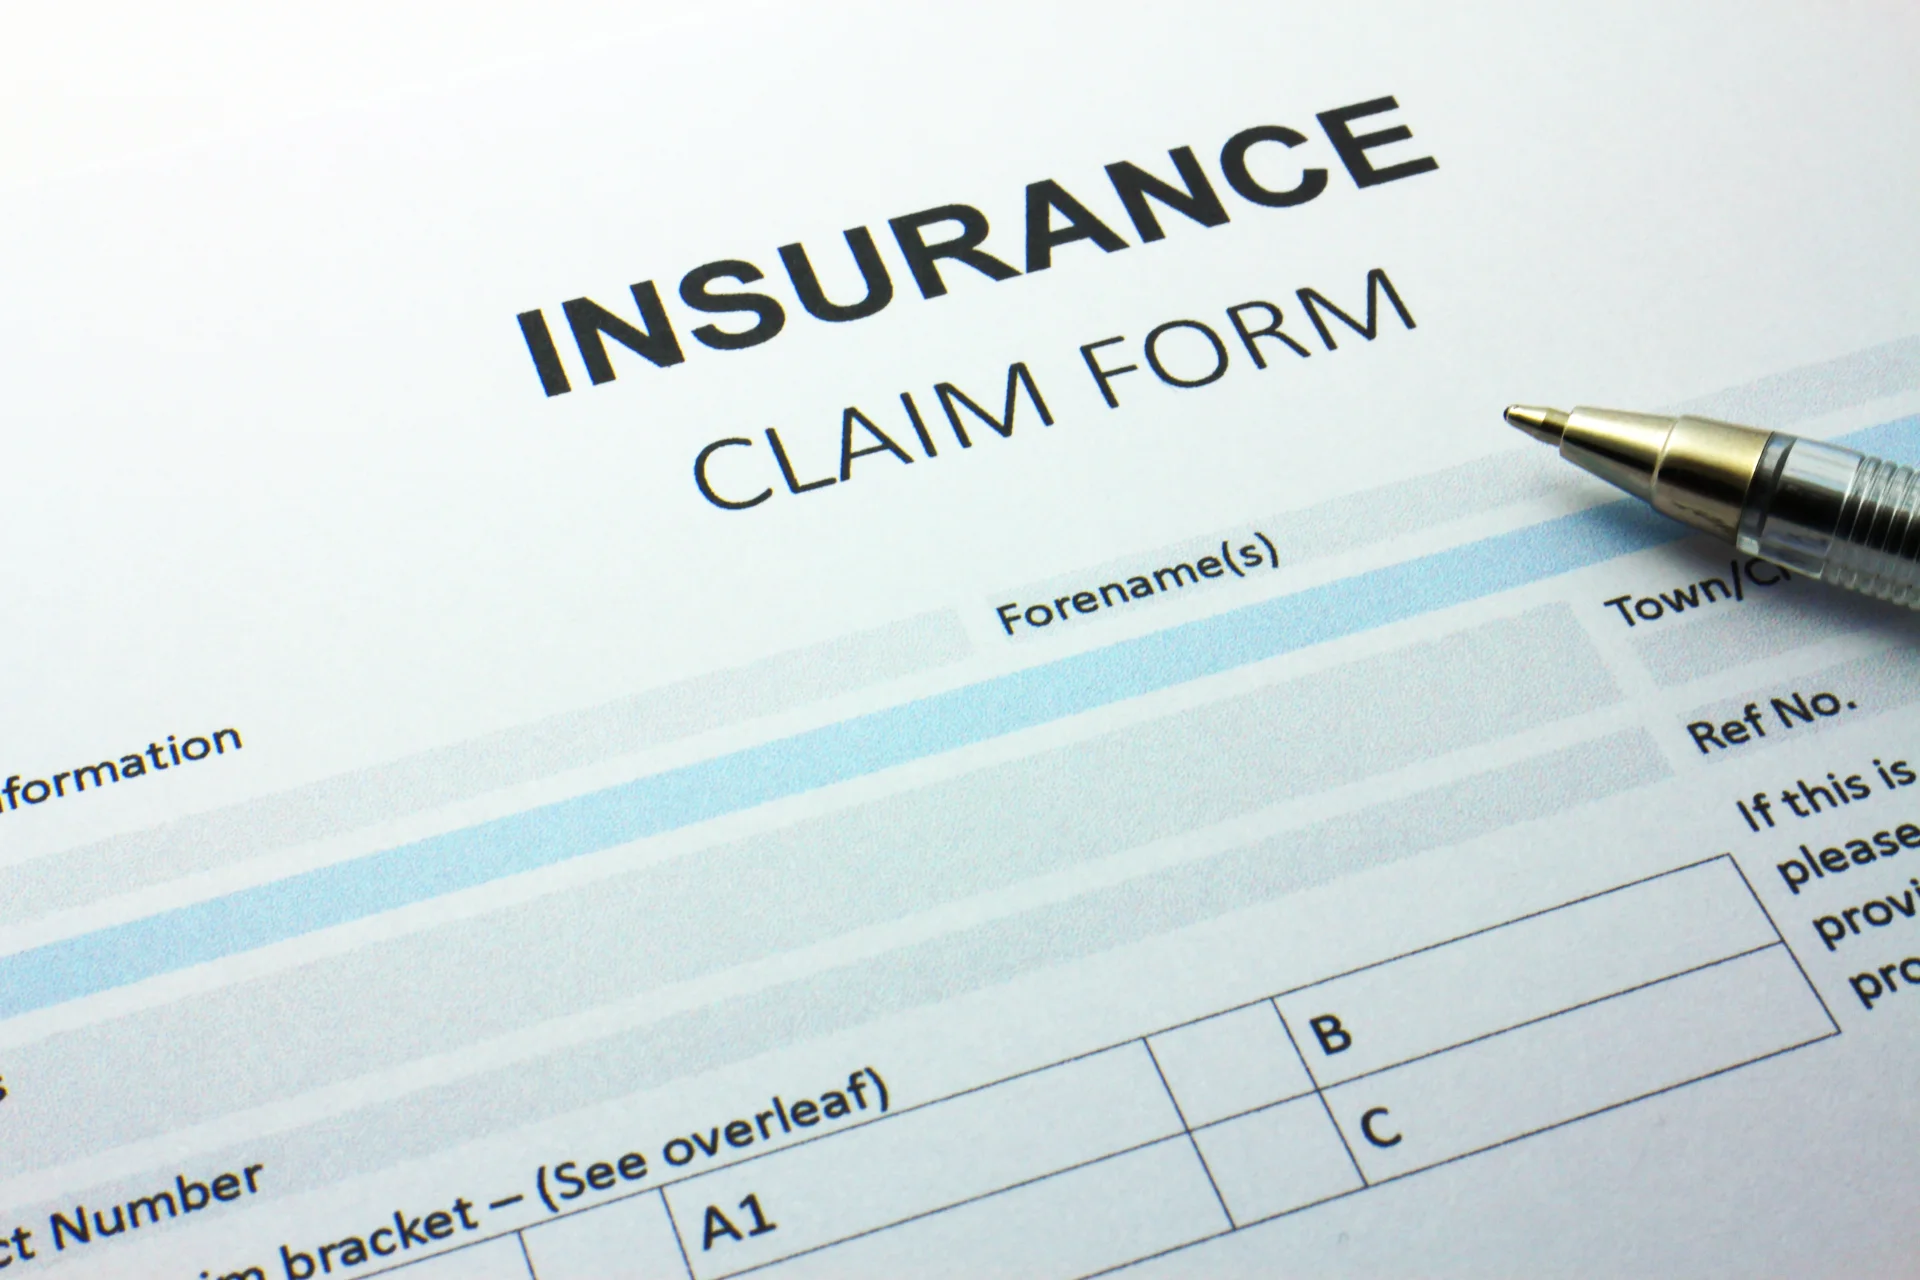 A form for diminished value claims in Florida